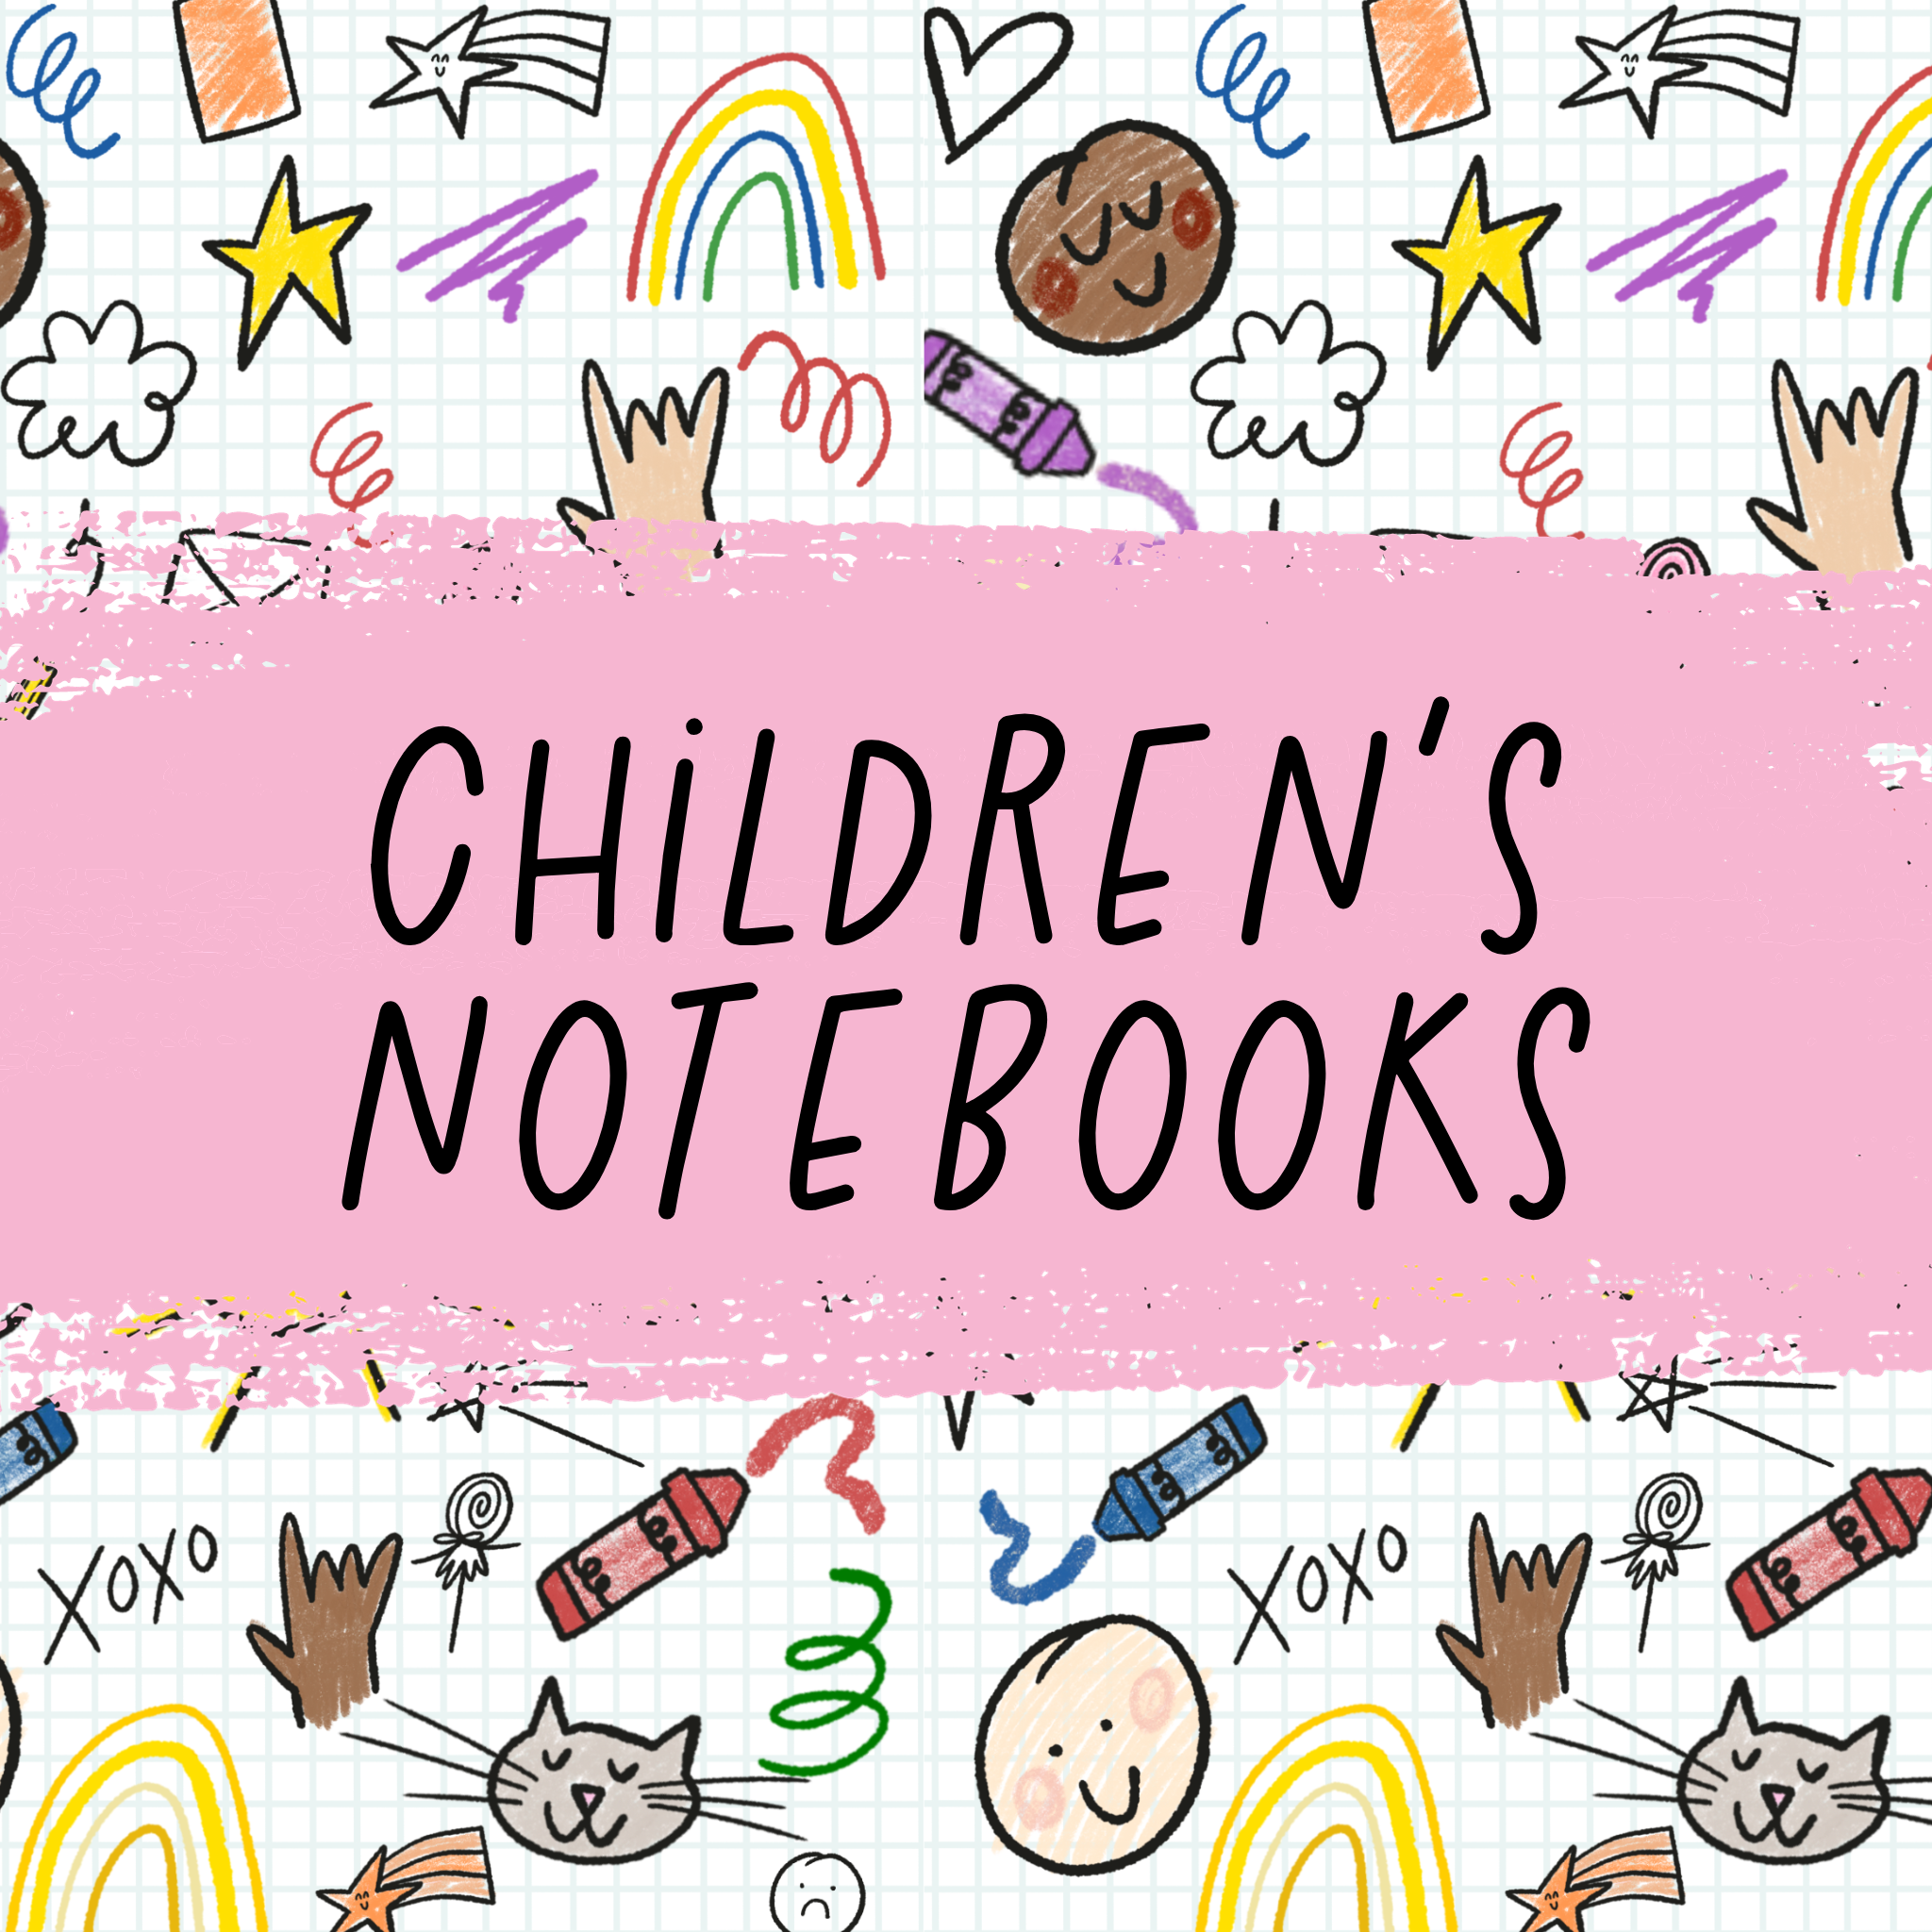 button to access self published children's journals also called primary composition notebooks self published with Amazon KDP and Kindle Direct Publishing